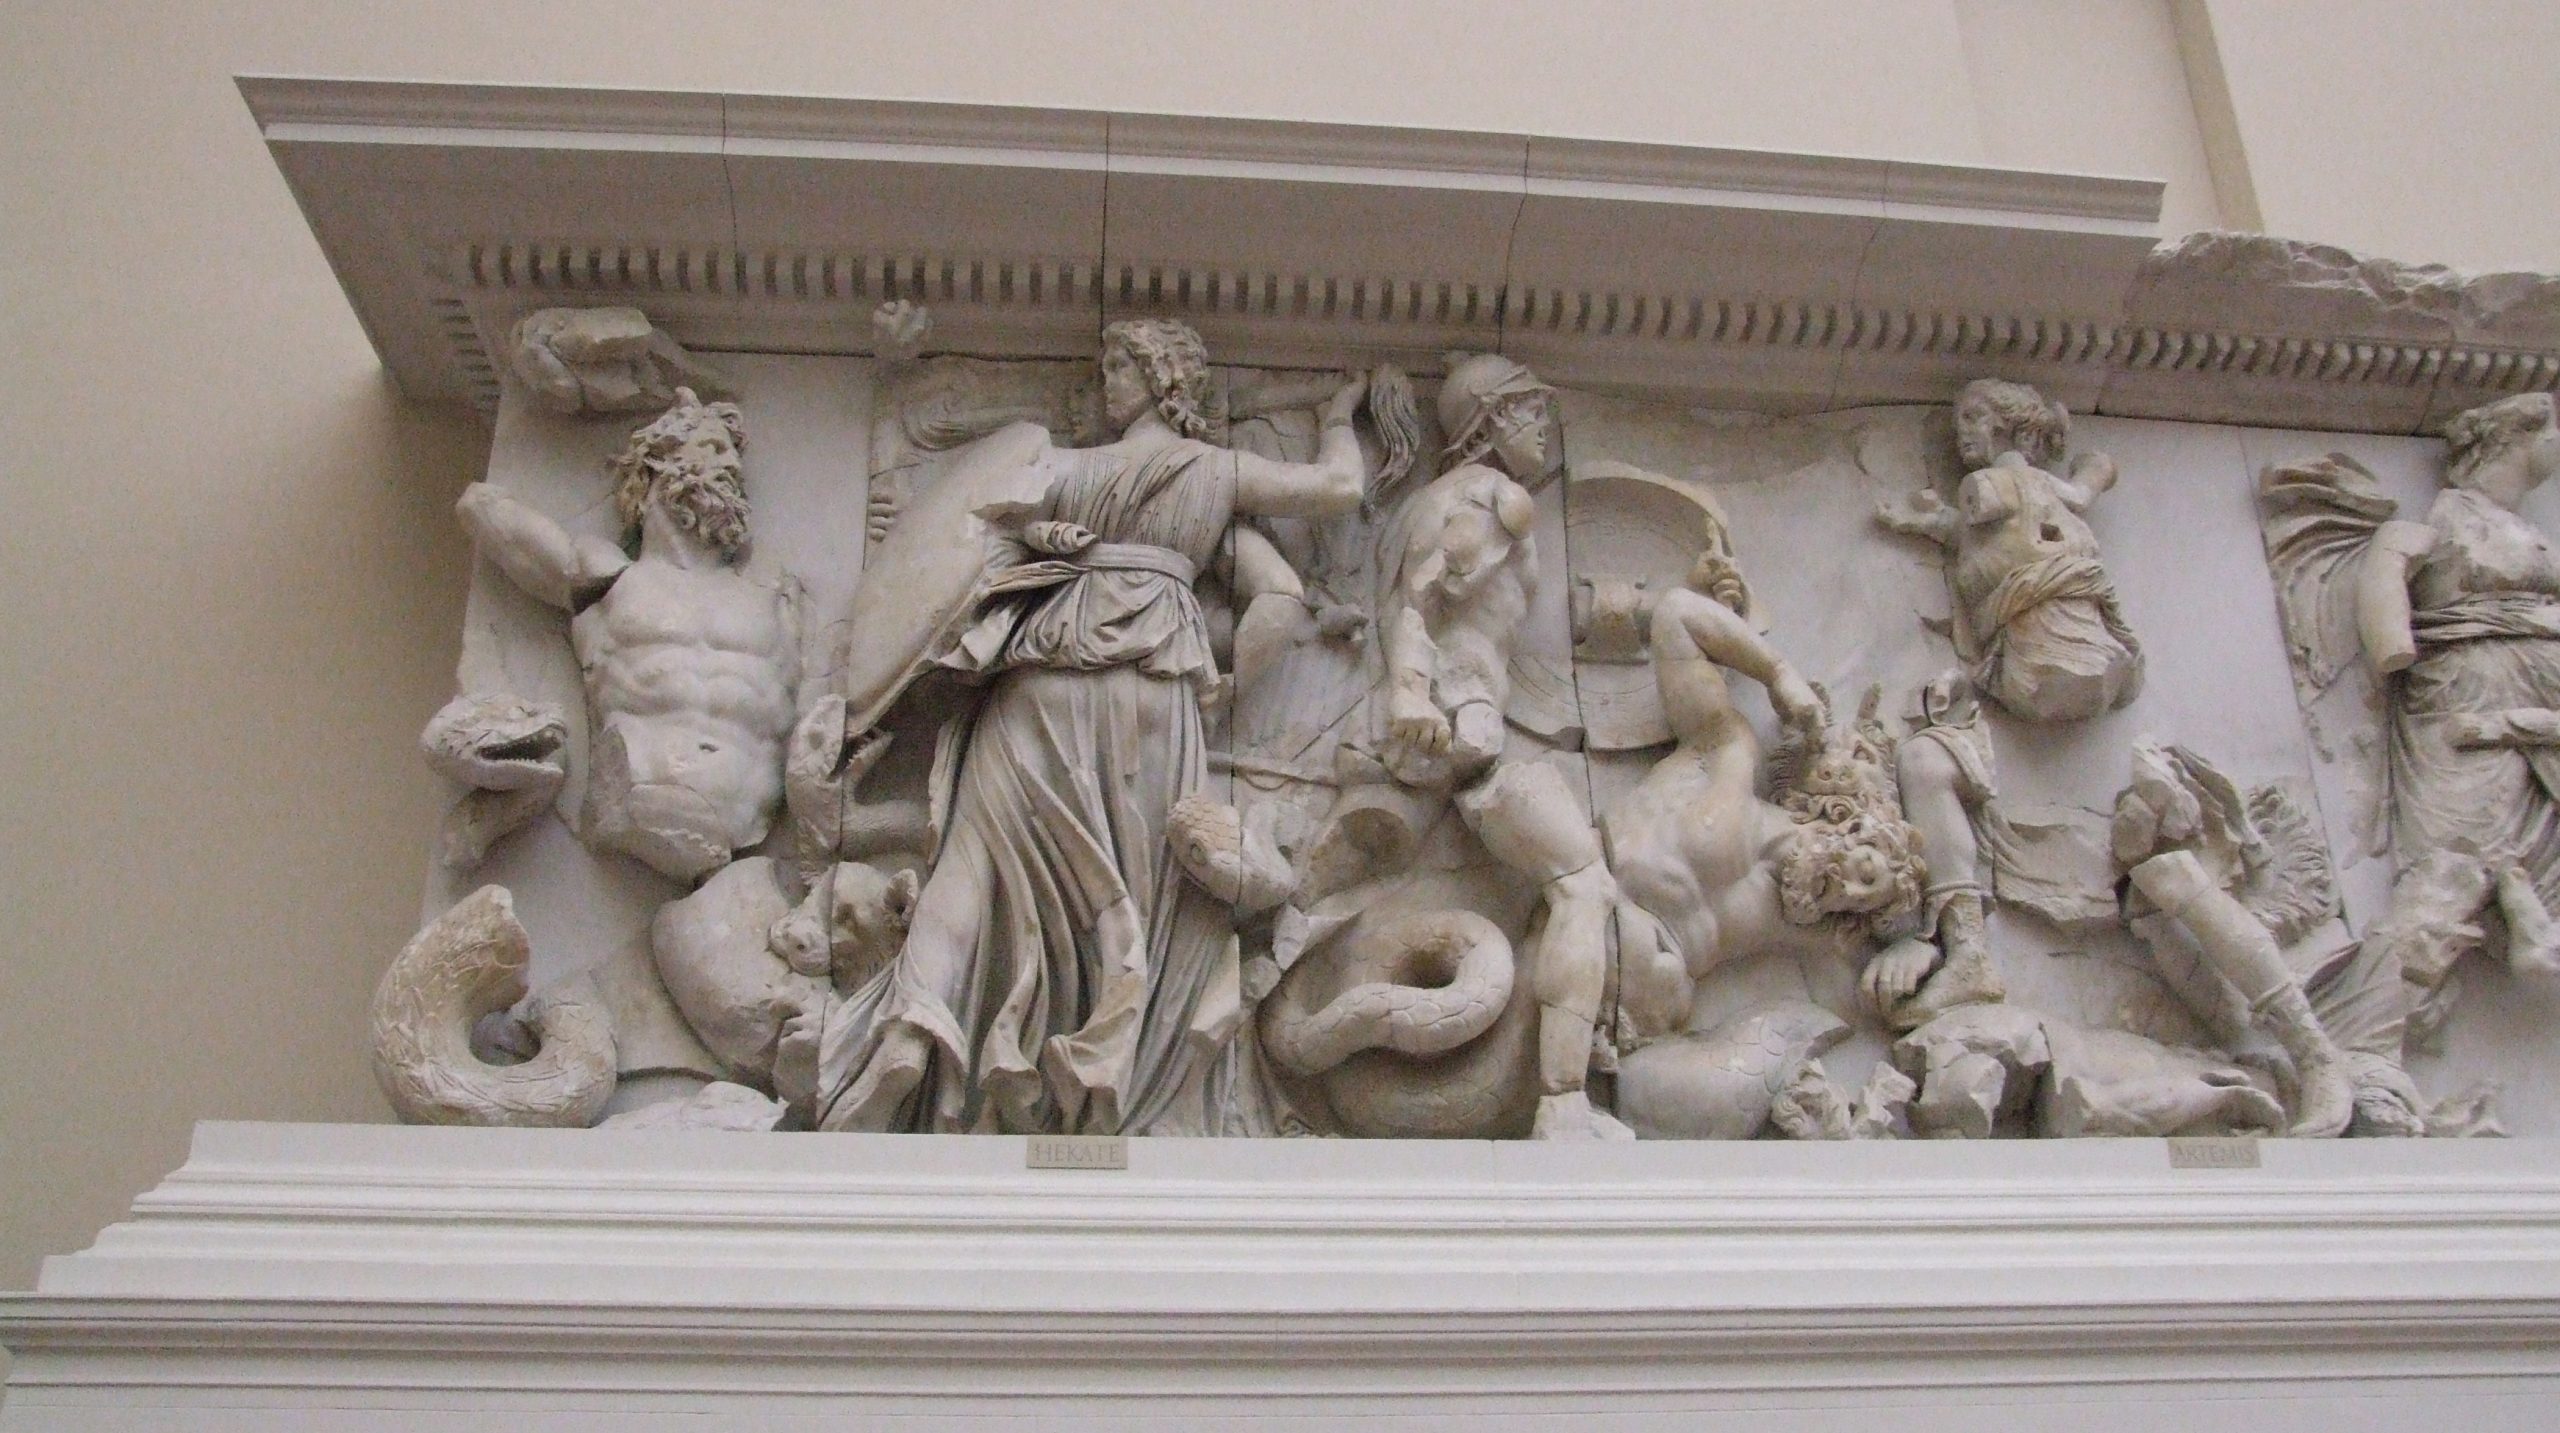 White marble frieze from the Altar of Pergamum. Left hand scene shows Hecate on the right with shield and brandishing torch. To her left the monster Clytios, with snakes for legs is attacking. One of his snake legs bites Hecate's shield. One of Hecate's dogs bites at the lower torso of Clytias.